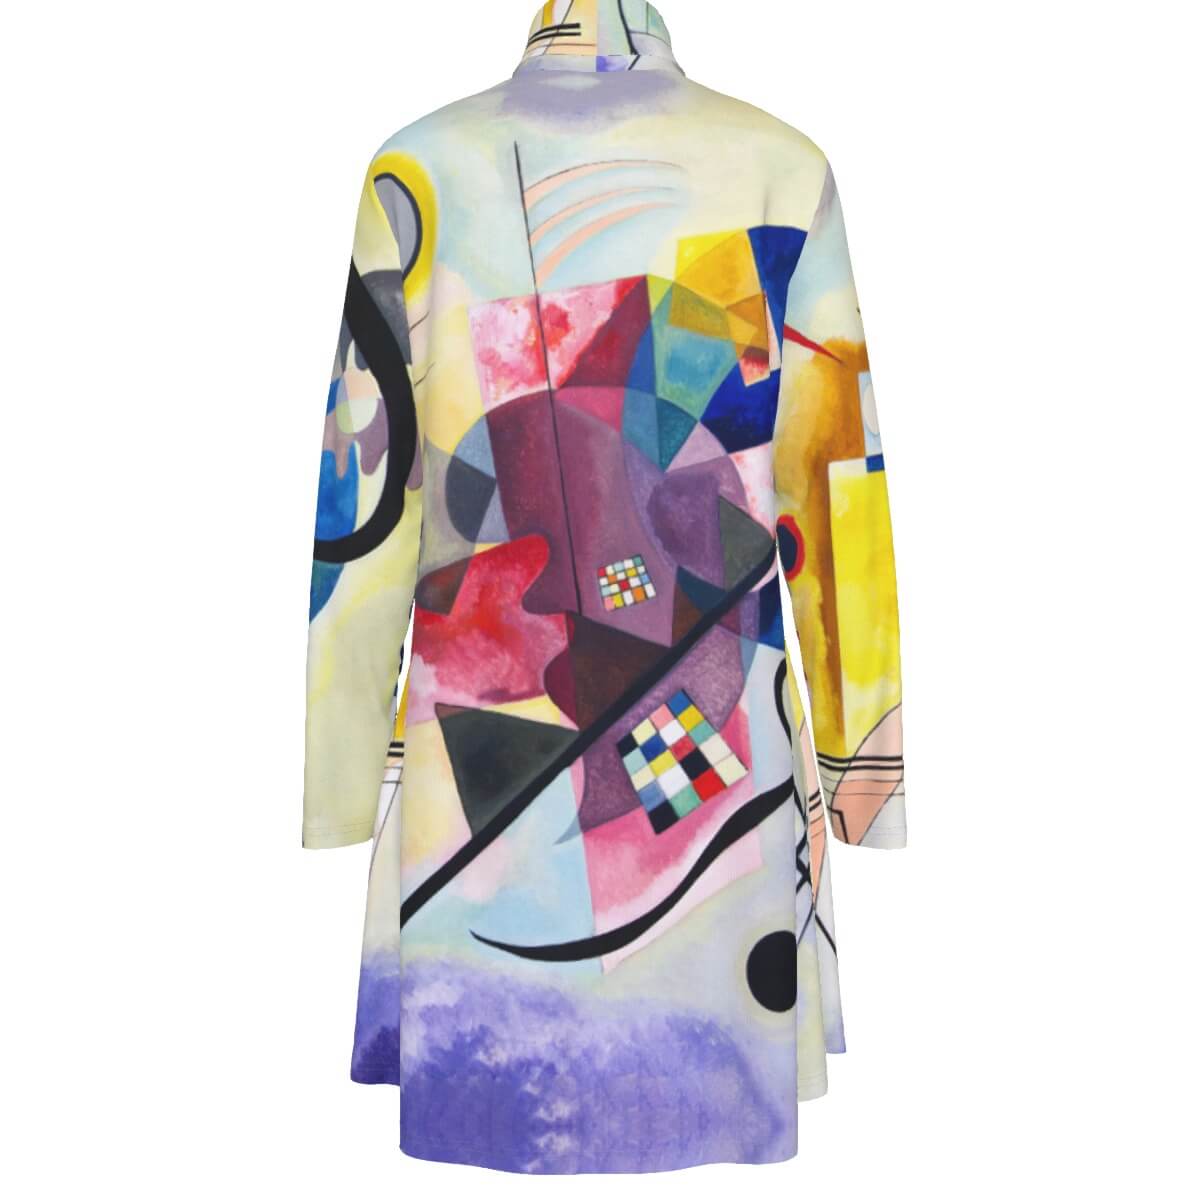 Abstract Art Fashion in Yellow, Red, Blue